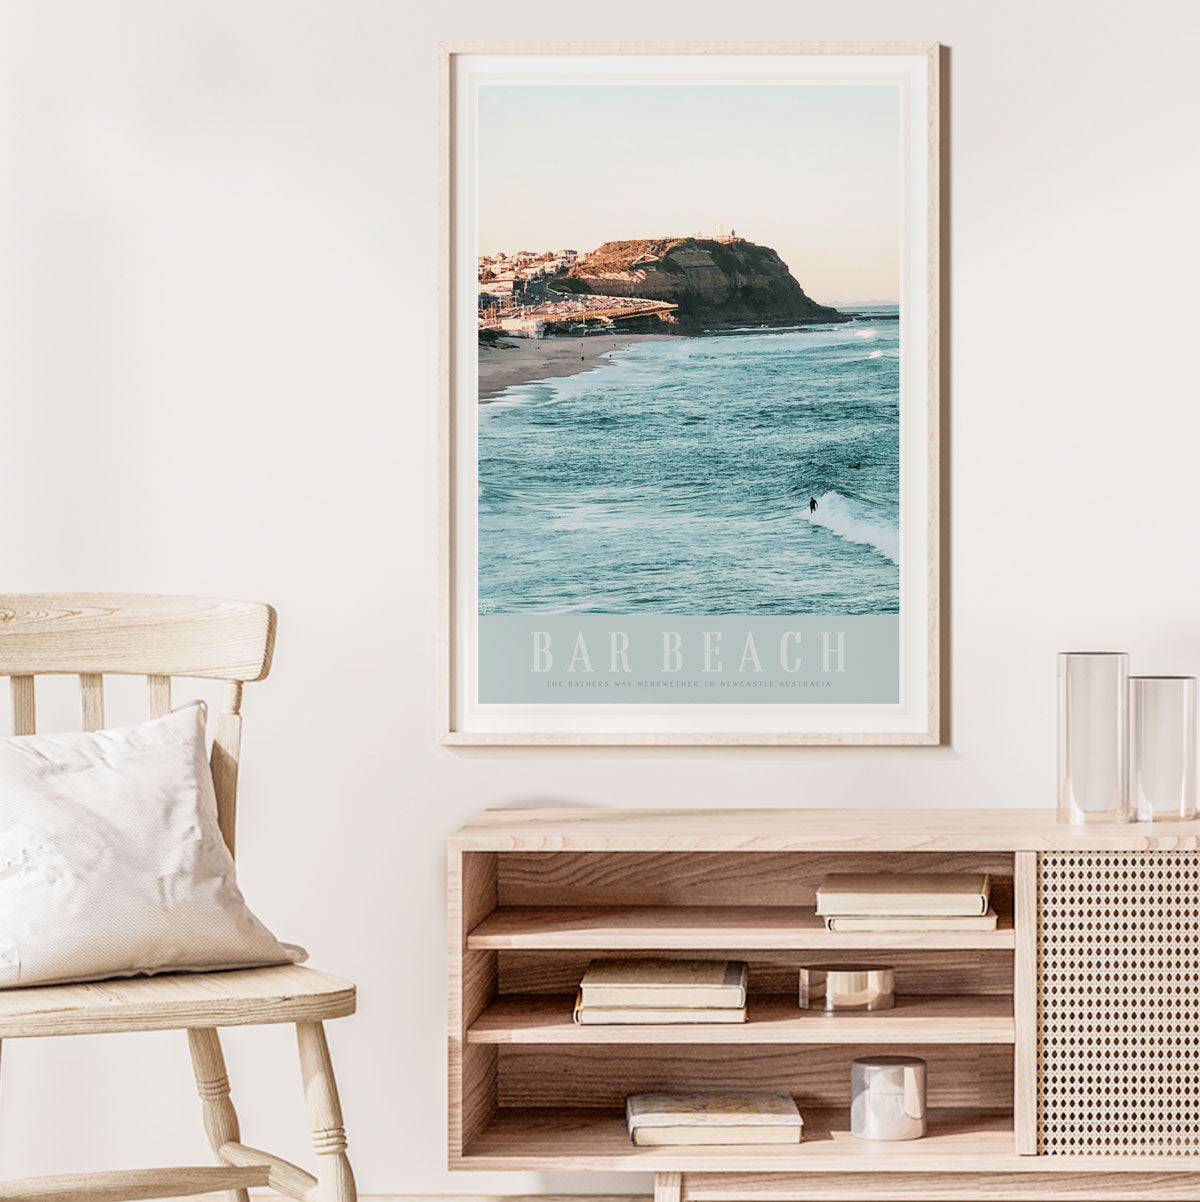 Bar Beach Newcastle vintage print from Places We Luv